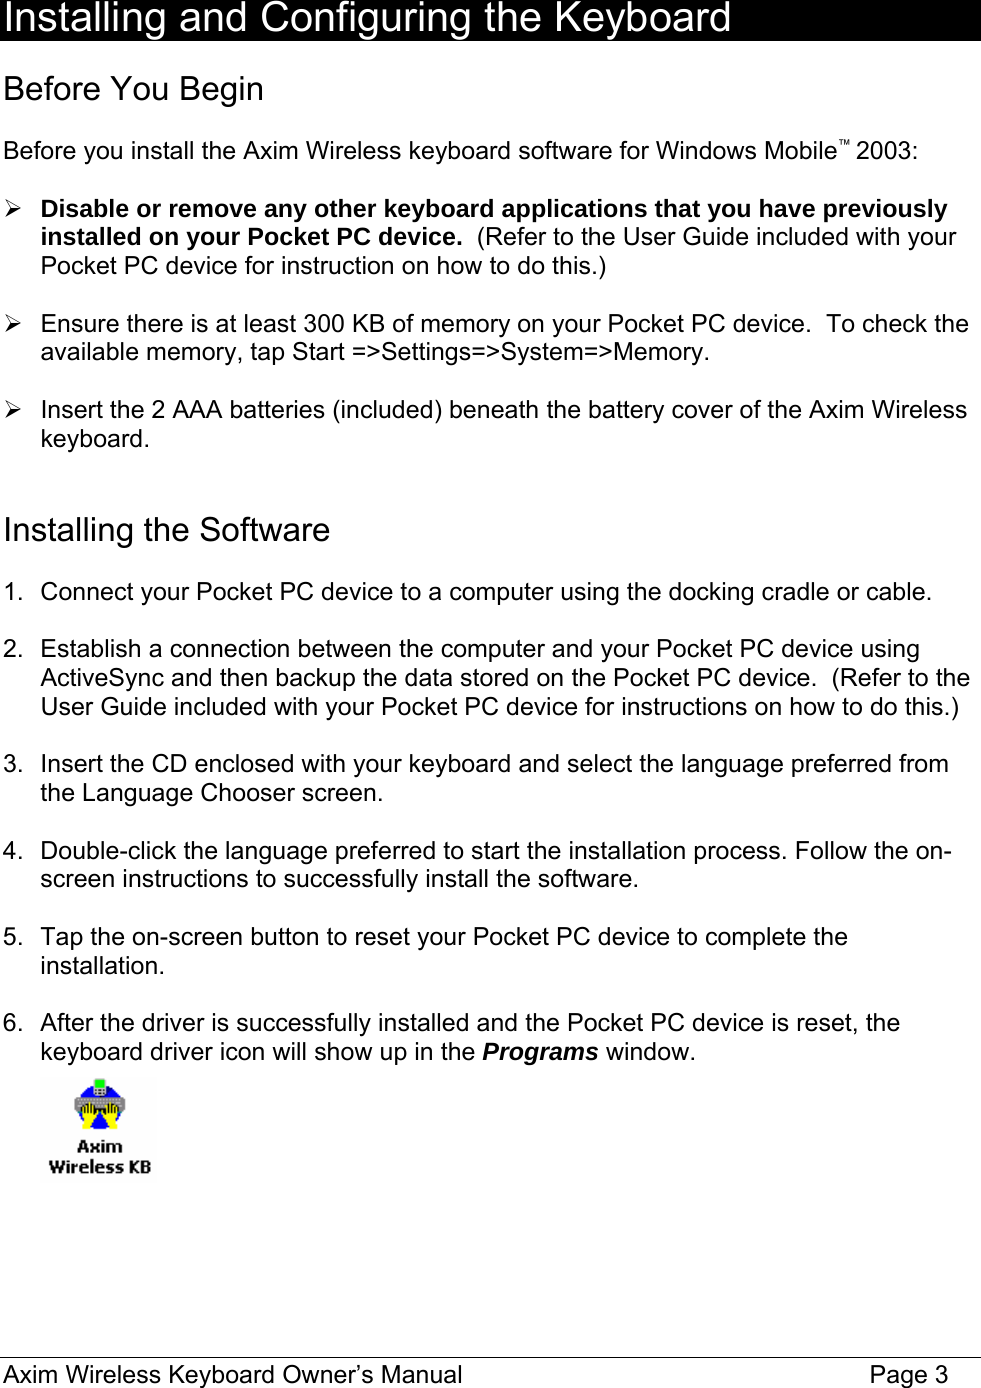  Installing and Configuring the Keyboard  Before You Begin  Before you install the Axim Wireless keyboard software for Windows Mobile™ 2003:  ¾ Disable or remove any other keyboard applications that you have previously installed on your Pocket PC device.  (Refer to the User Guide included with your Pocket PC device for instruction on how to do this.)  ¾  Ensure there is at least 300 KB of memory on your Pocket PC device.  To check the available memory, tap Start =&gt;Settings=&gt;System=&gt;Memory.    ¾  Insert the 2 AAA batteries (included) beneath the battery cover of the Axim Wireless keyboard.   Installing the Software  1.  Connect your Pocket PC device to a computer using the docking cradle or cable.  2.  Establish a connection between the computer and your Pocket PC device using ActiveSync and then backup the data stored on the Pocket PC device.  (Refer to the User Guide included with your Pocket PC device for instructions on how to do this.)  3.  Insert the CD enclosed with your keyboard and select the language preferred from the Language Chooser screen.   4.  Double-click the language preferred to start the installation process. Follow the on-screen instructions to successfully install the software.  5.  Tap the on-screen button to reset your Pocket PC device to complete the installation.  6.  After the driver is successfully installed and the Pocket PC device is reset, the keyboard driver icon will show up in the Programs window.        Axim Wireless Keyboard Owner’s Manual                                                                 Page 3 